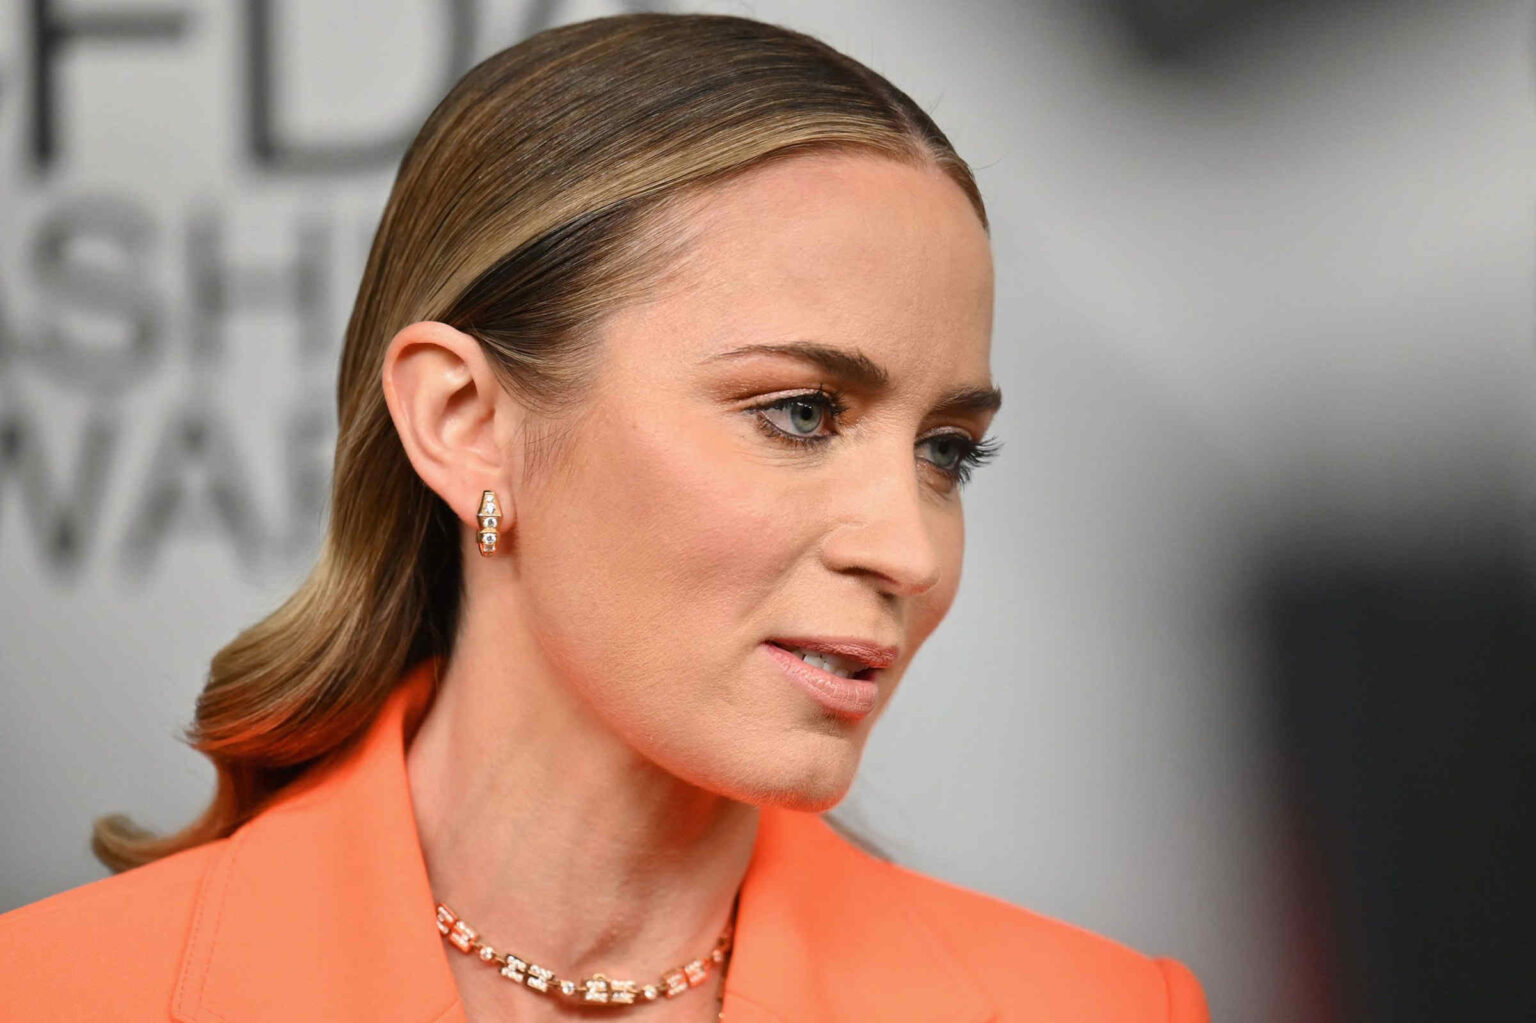 When you're watching movies with Emily Blunt, you're usually in for a good time. But her newest project 'The English' might cost her loyal fans.